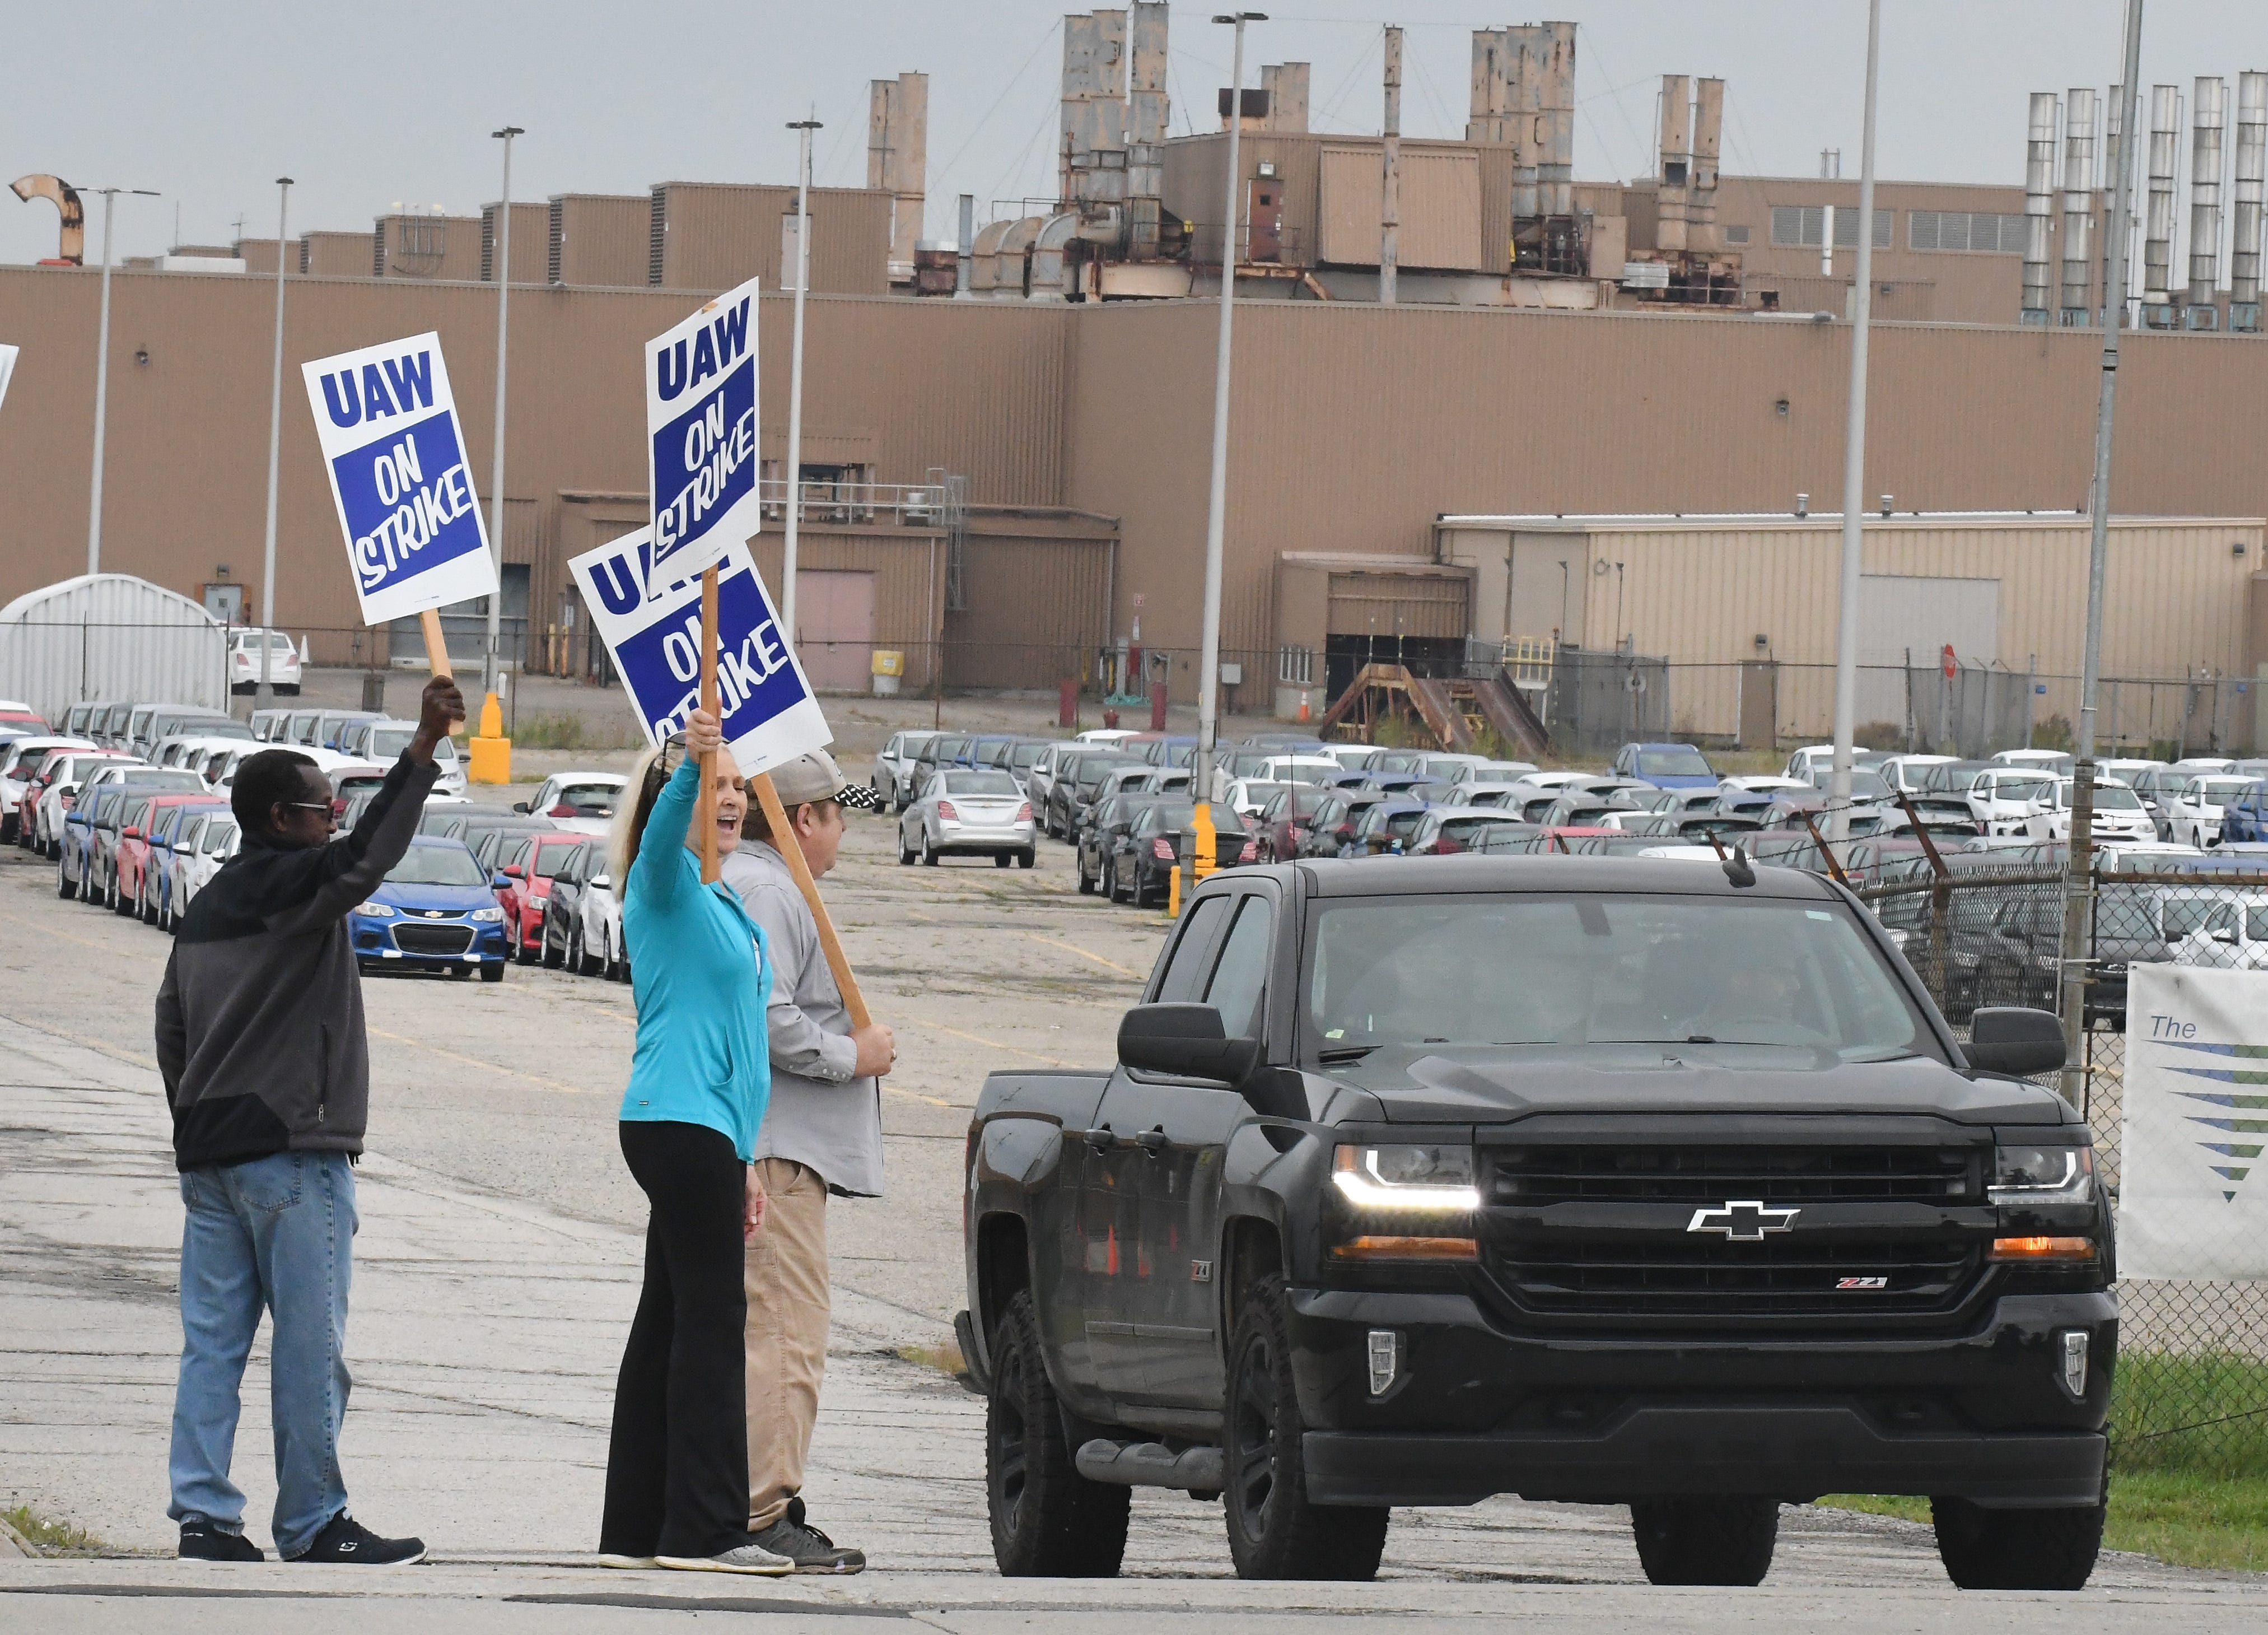 Debbie Gibson and other UAW workers react as a car honks for picketers on the south side of the GM Lake Orion Assembly plant in Lake Orion, Michigan, early Monday, Sept. 16, 2019.